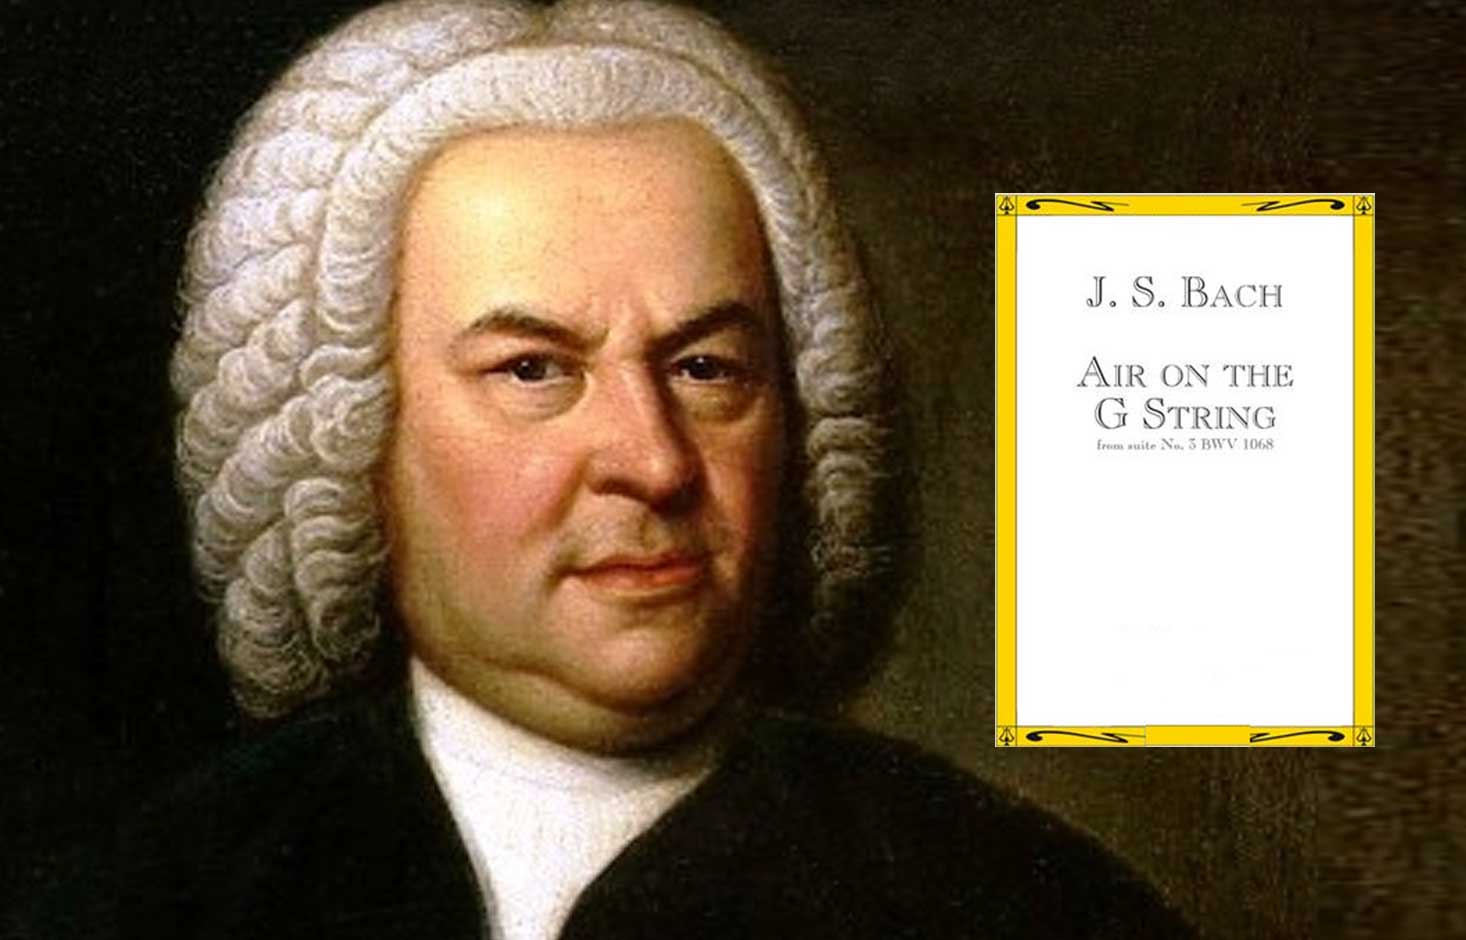 Bach's Air on the G String